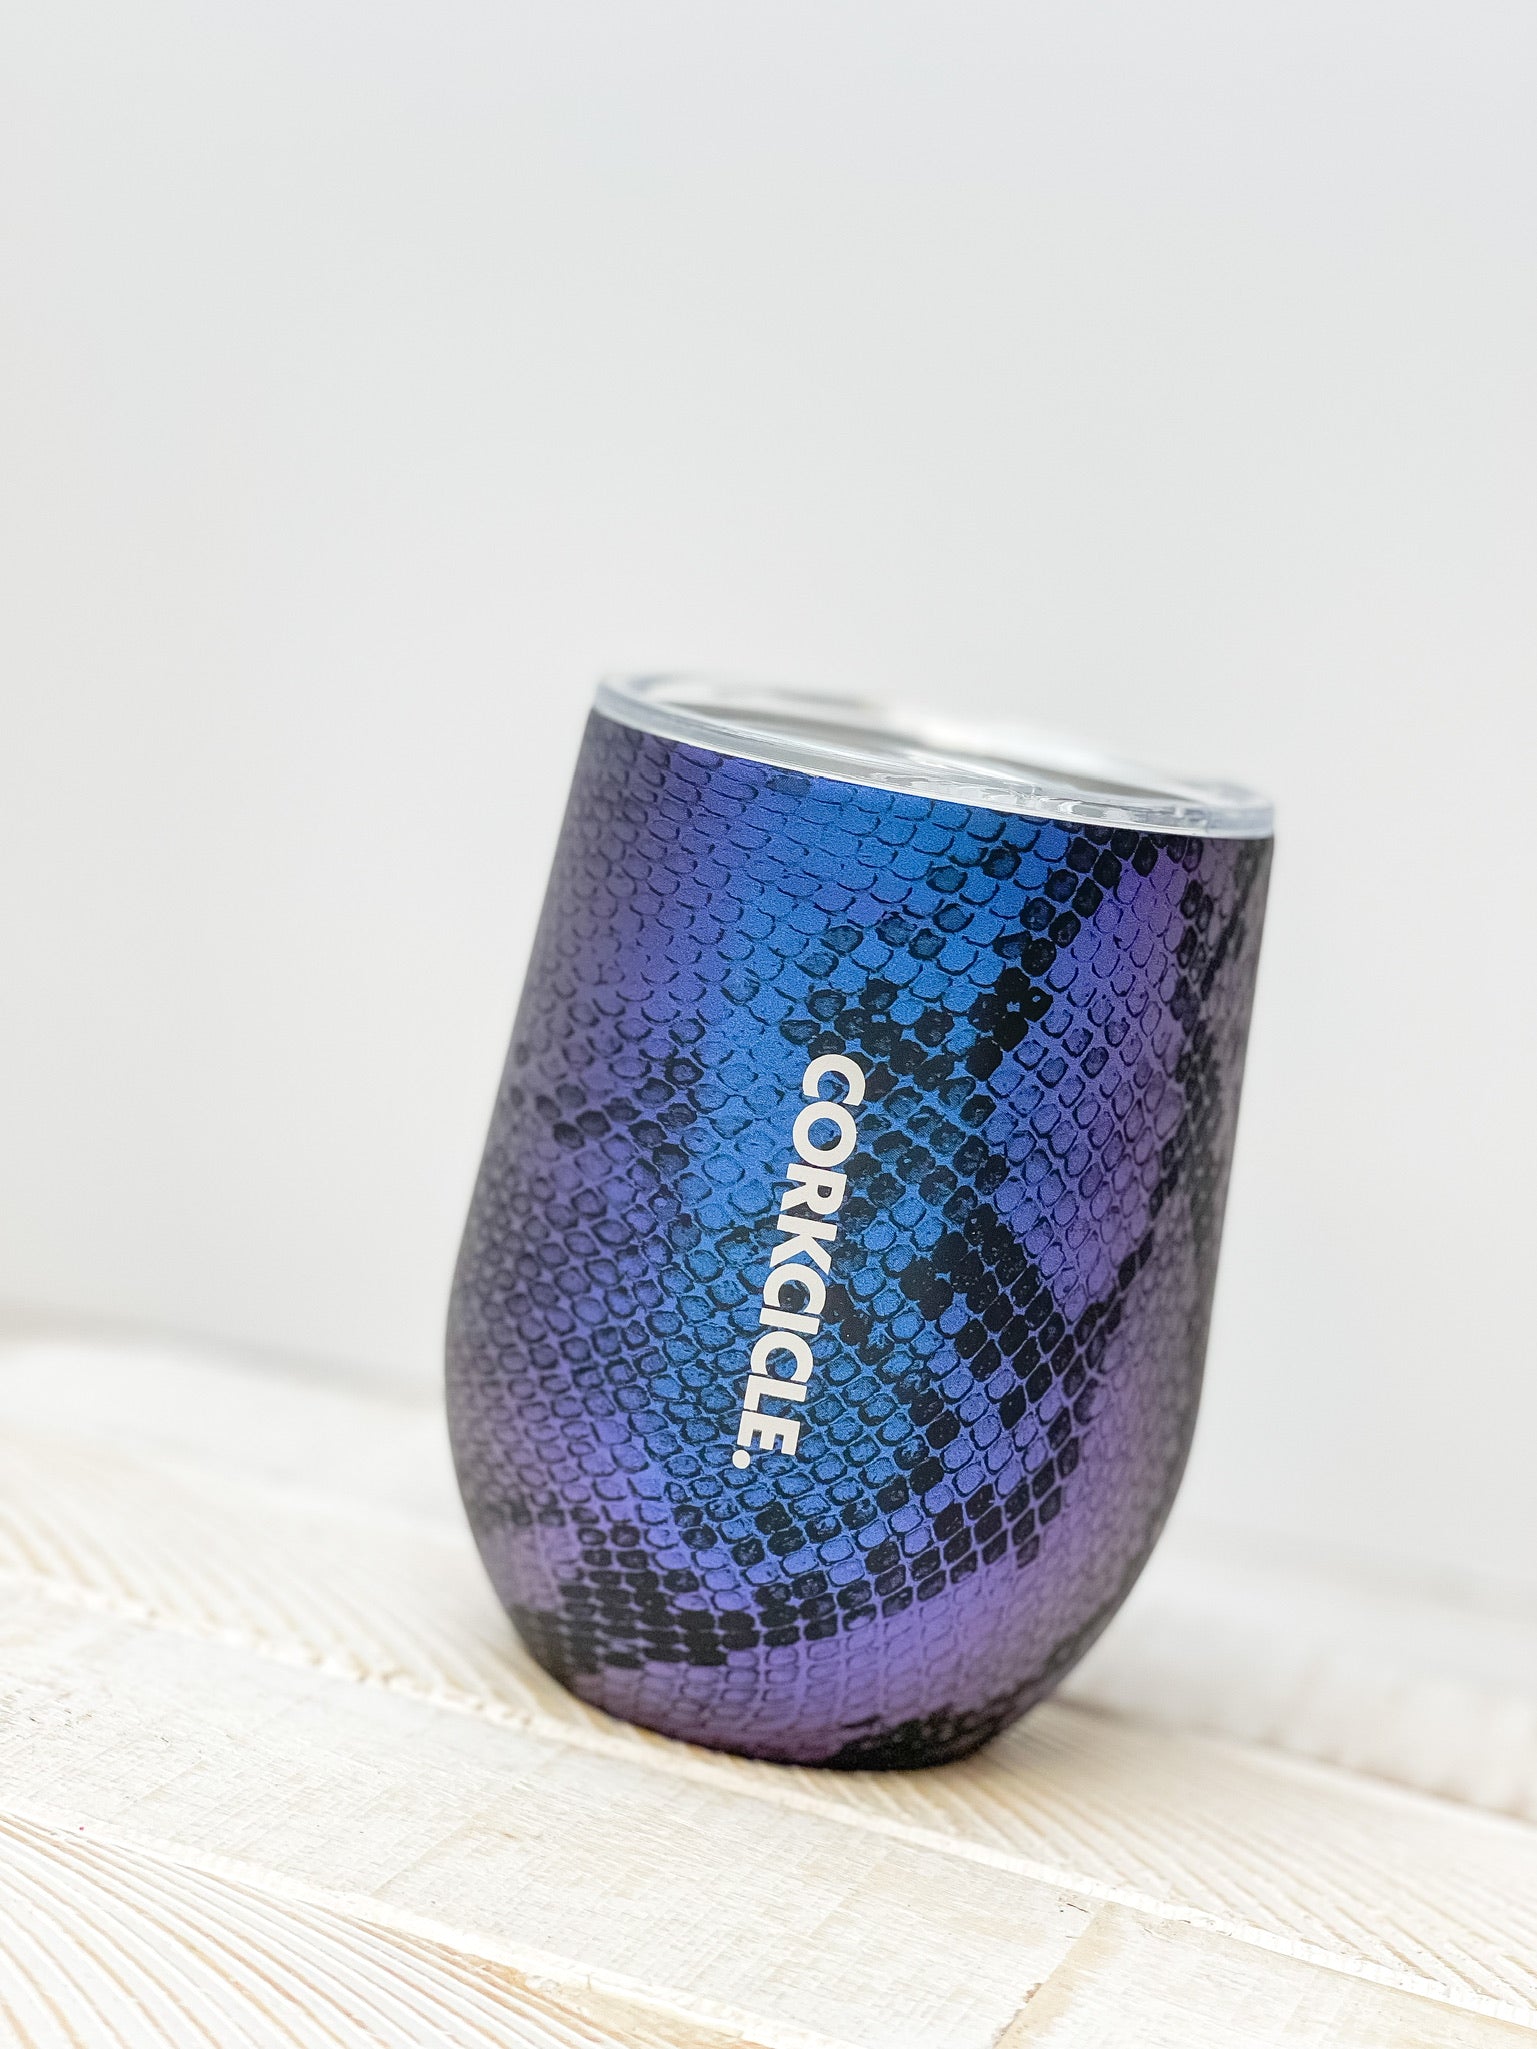 12 oz Stainless Steel Stemless Tumbler by Corkcicle - Rainboa